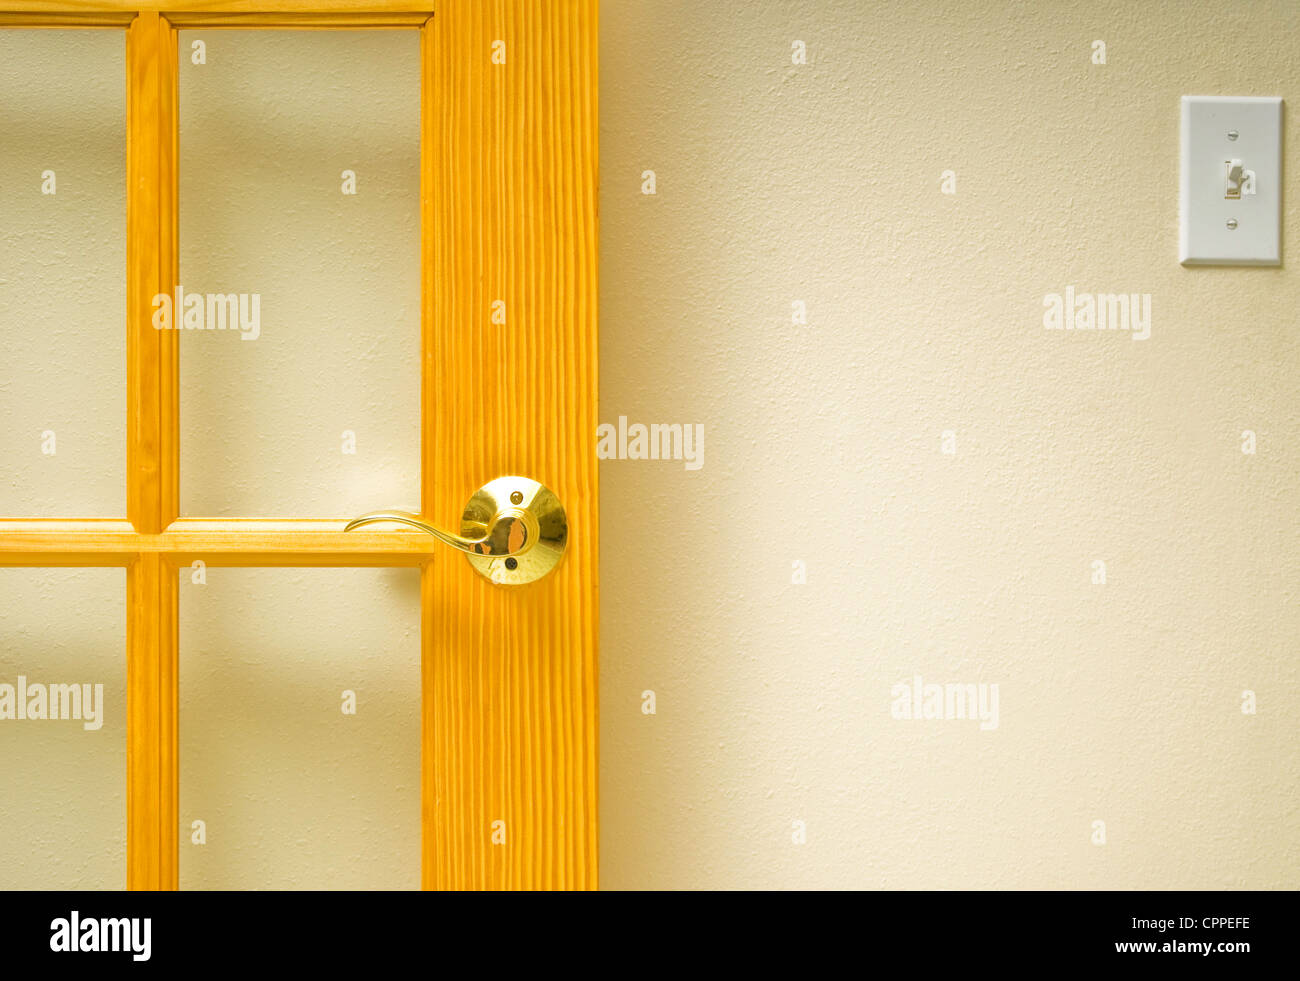 A section of wall with an open door and light switch Stock Photo